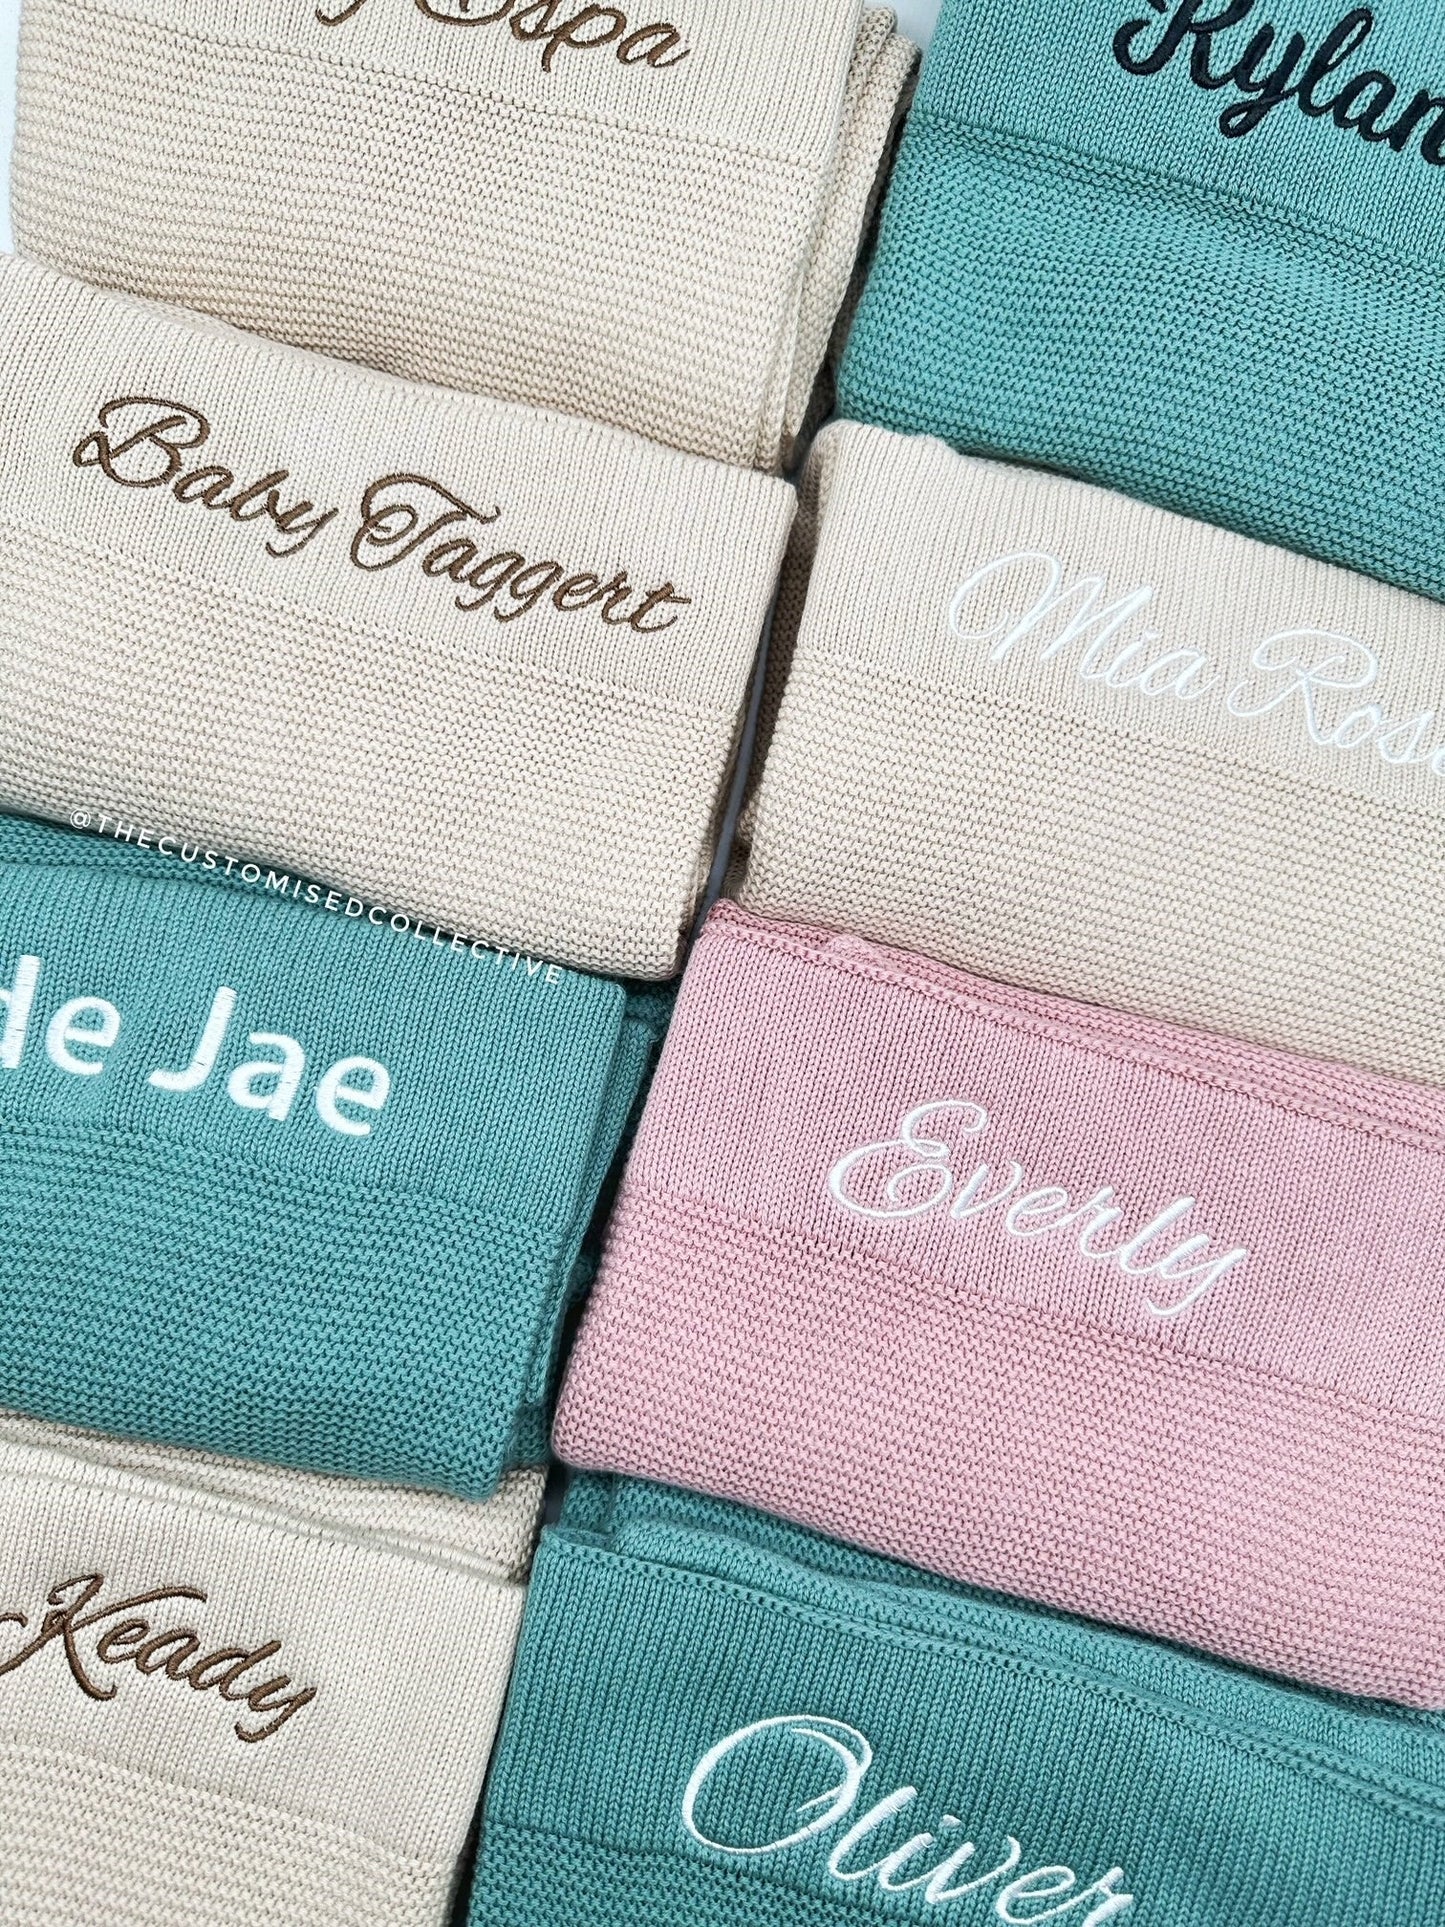 Embroidered Baby Blanket with Name - Thecustomisedcollective